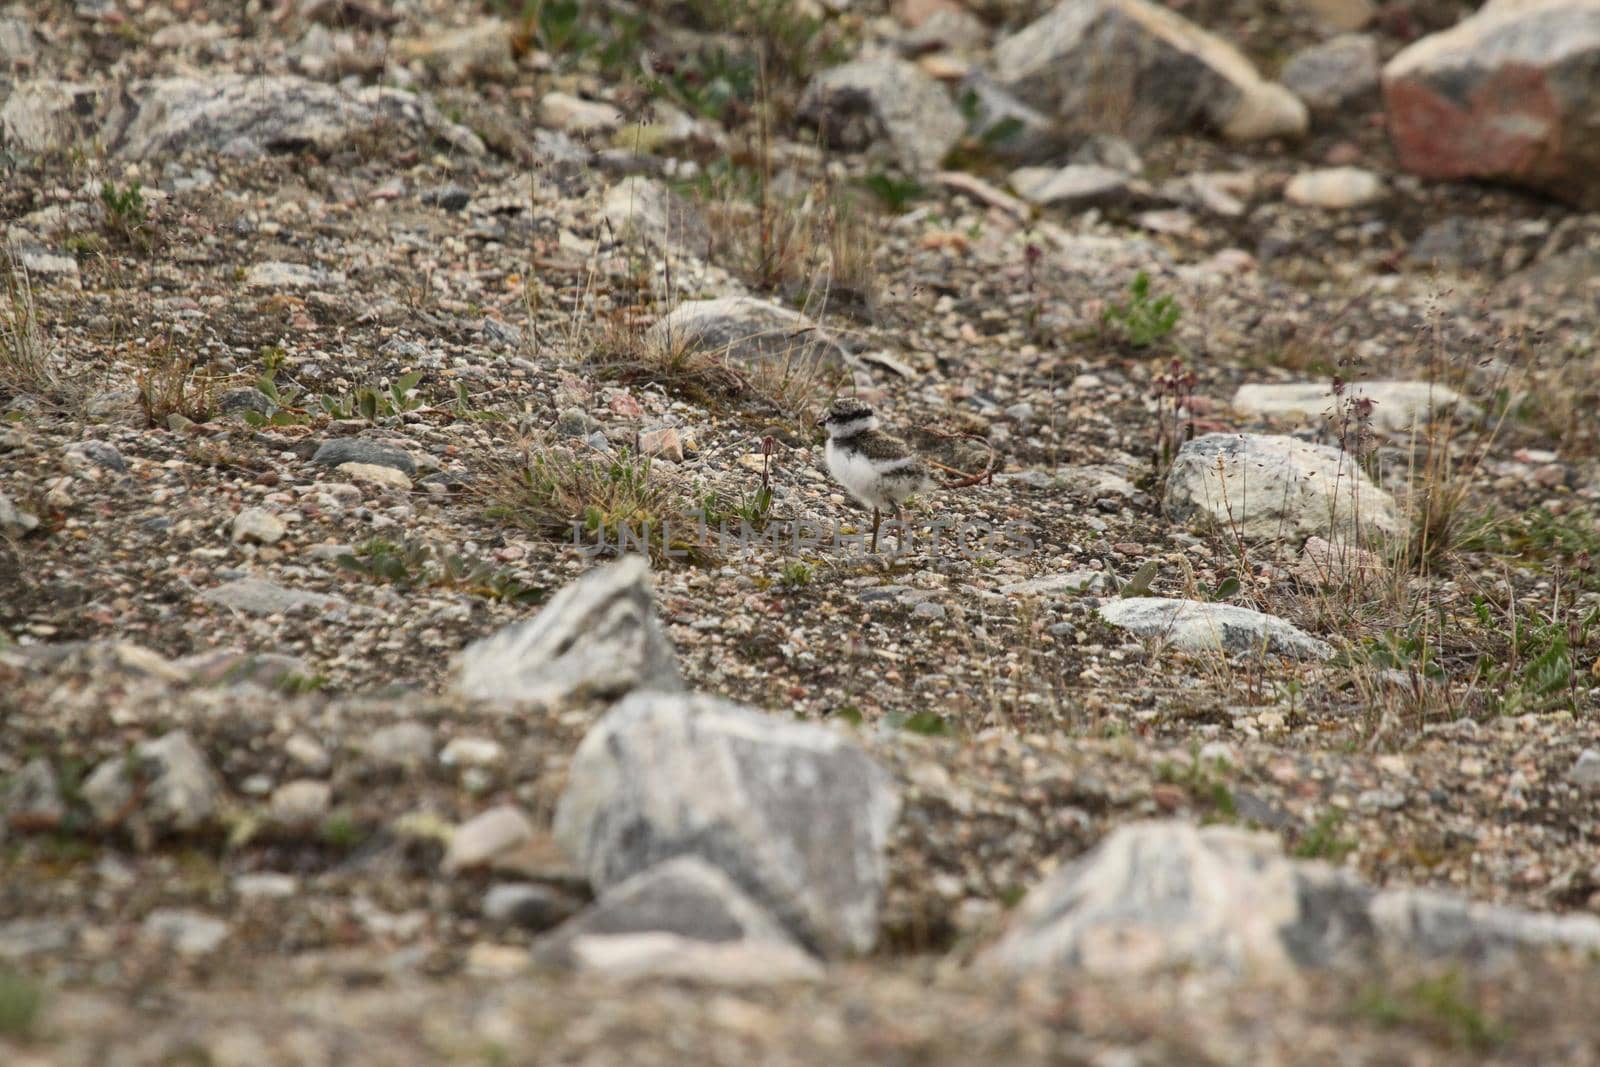 A young common ringed plover walking along a rocky tundra in Canada's arctic by Granchinho